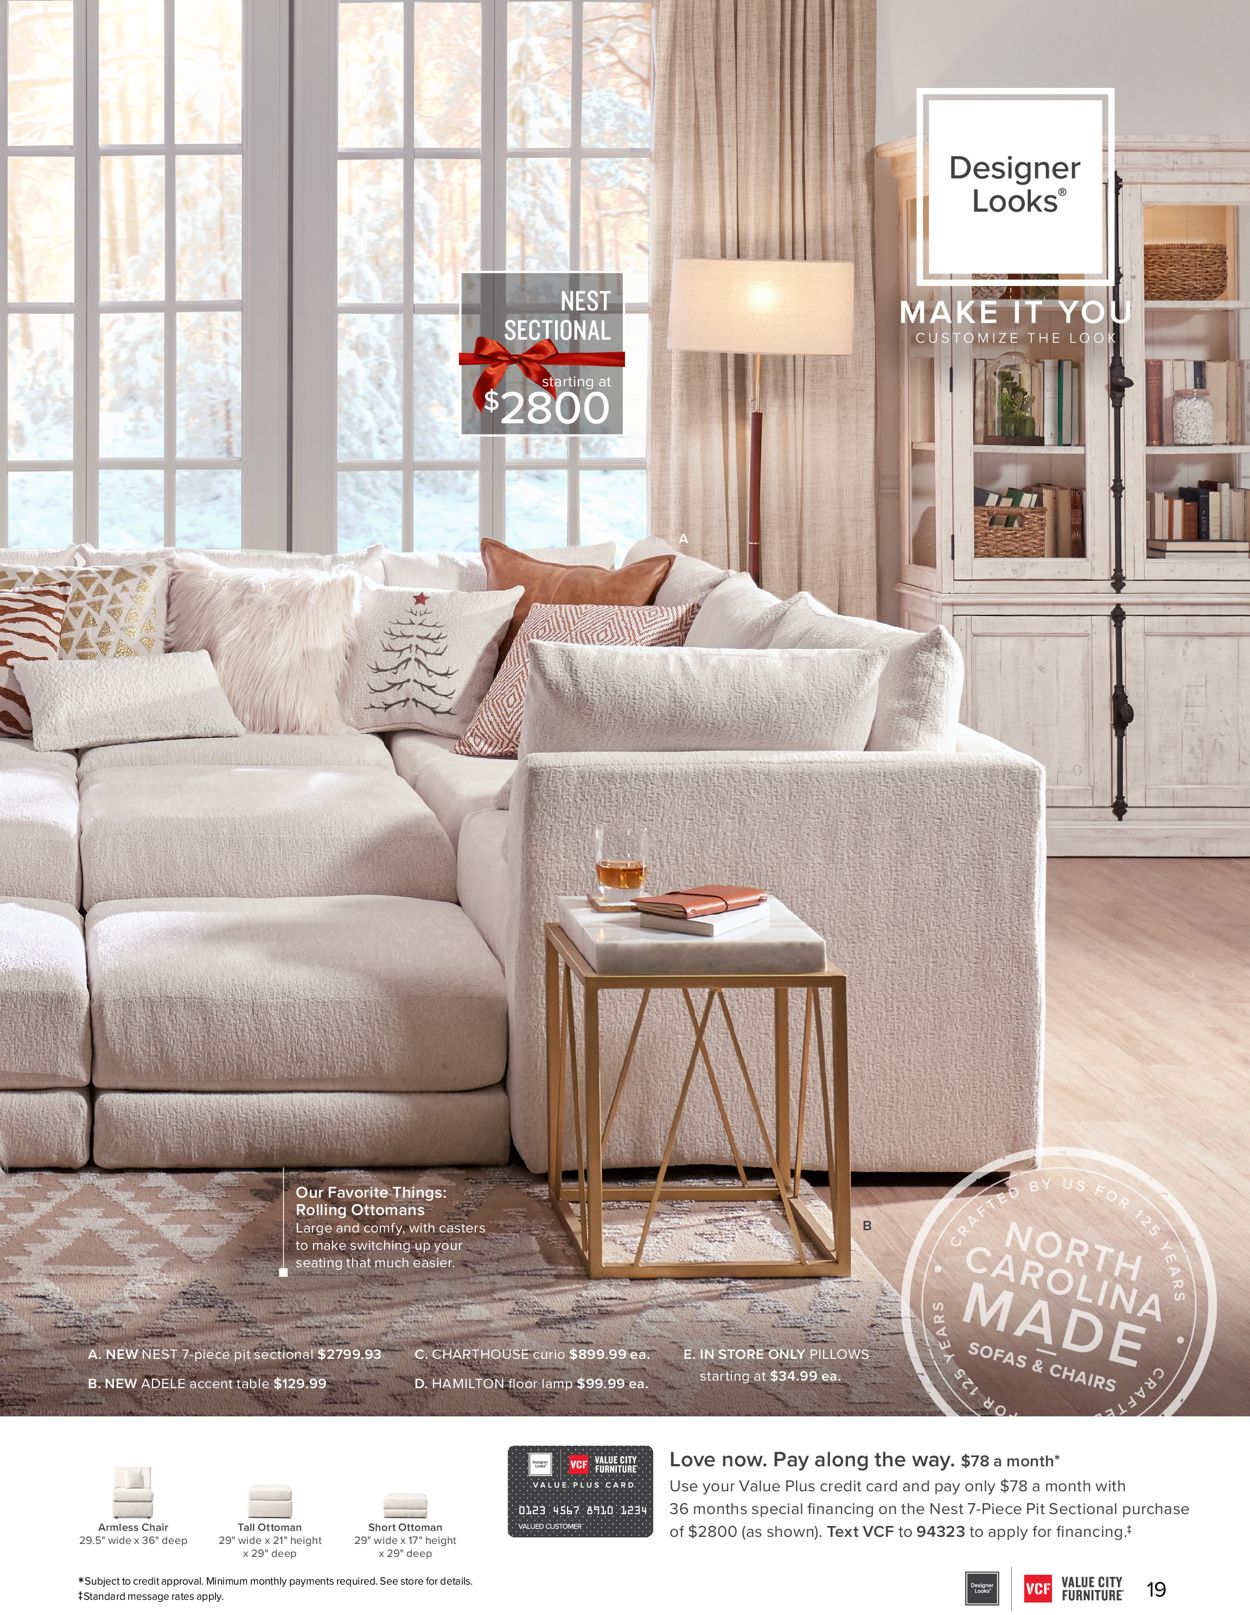 Value City Furniture Cur Weekly Ad, Value City Furniture Floor Lamps